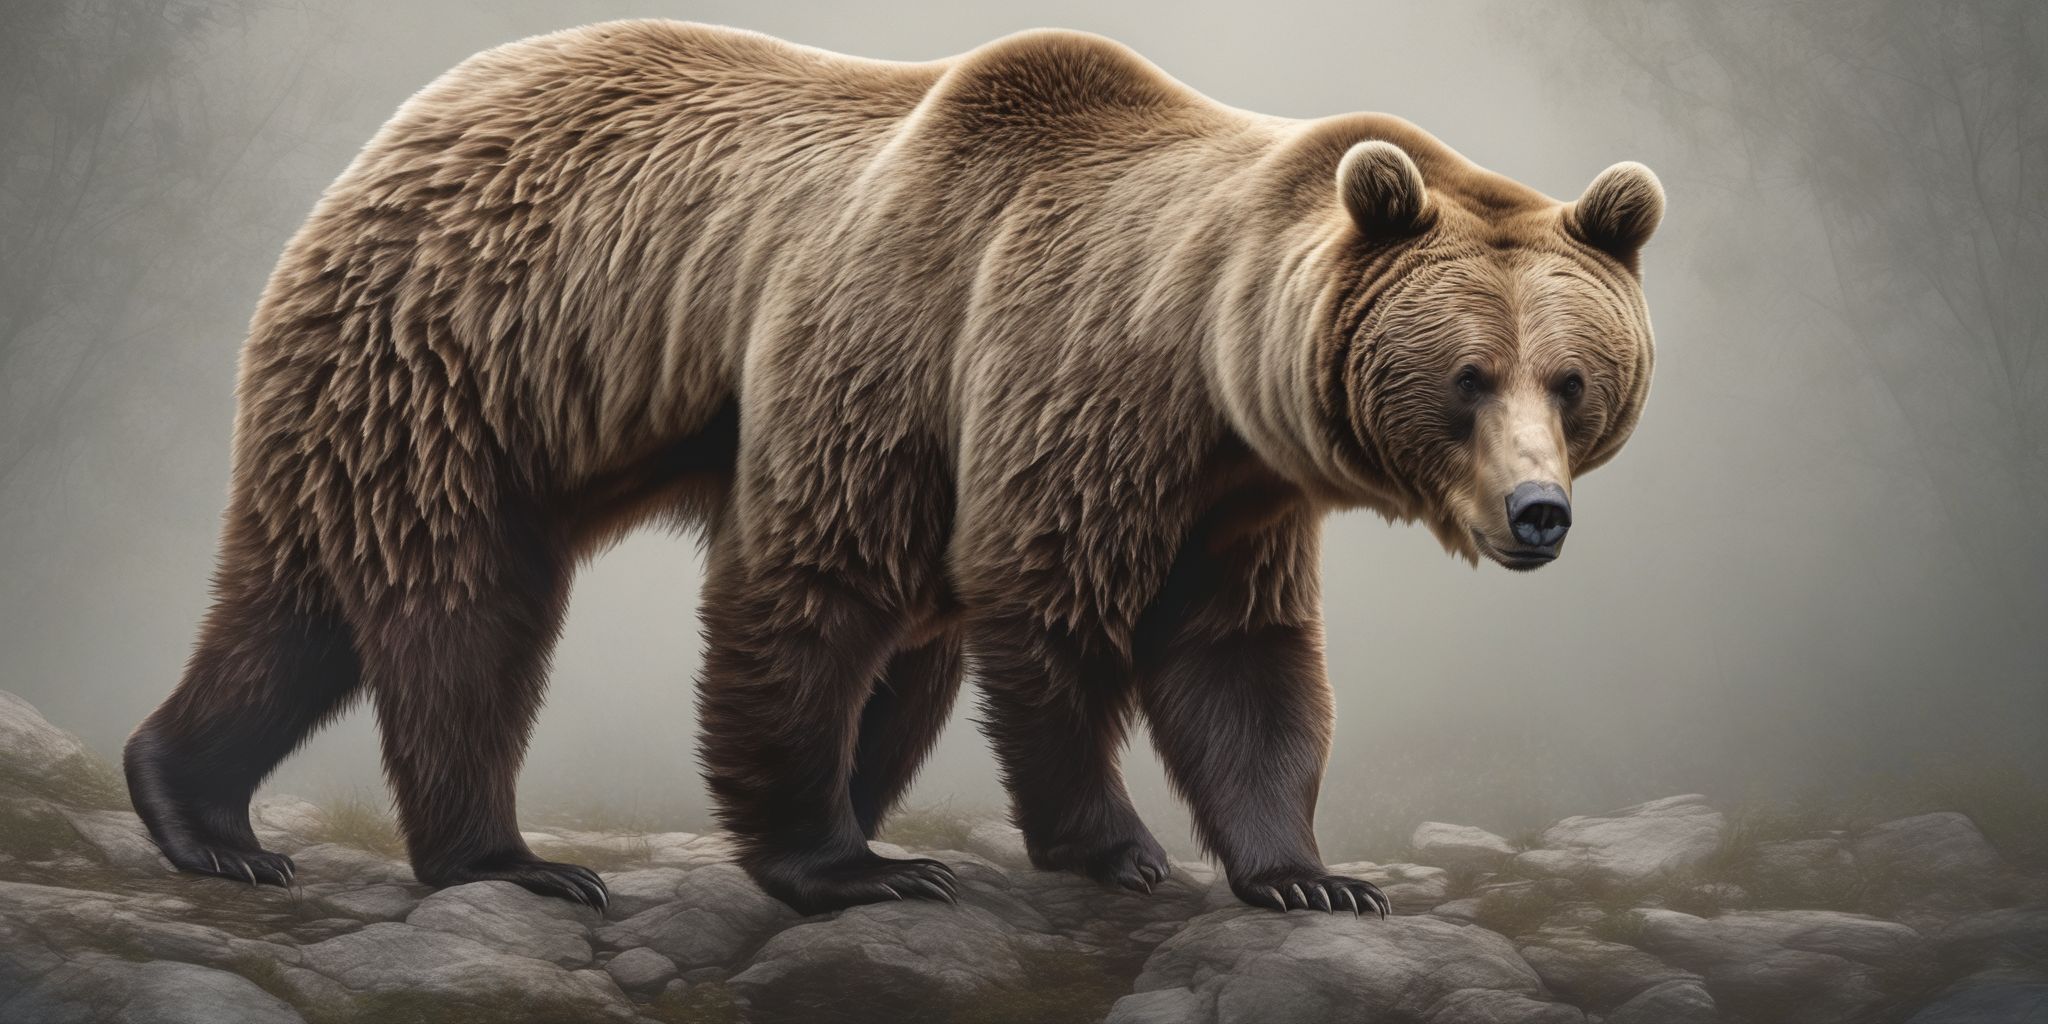 Bear  in realistic, photographic style